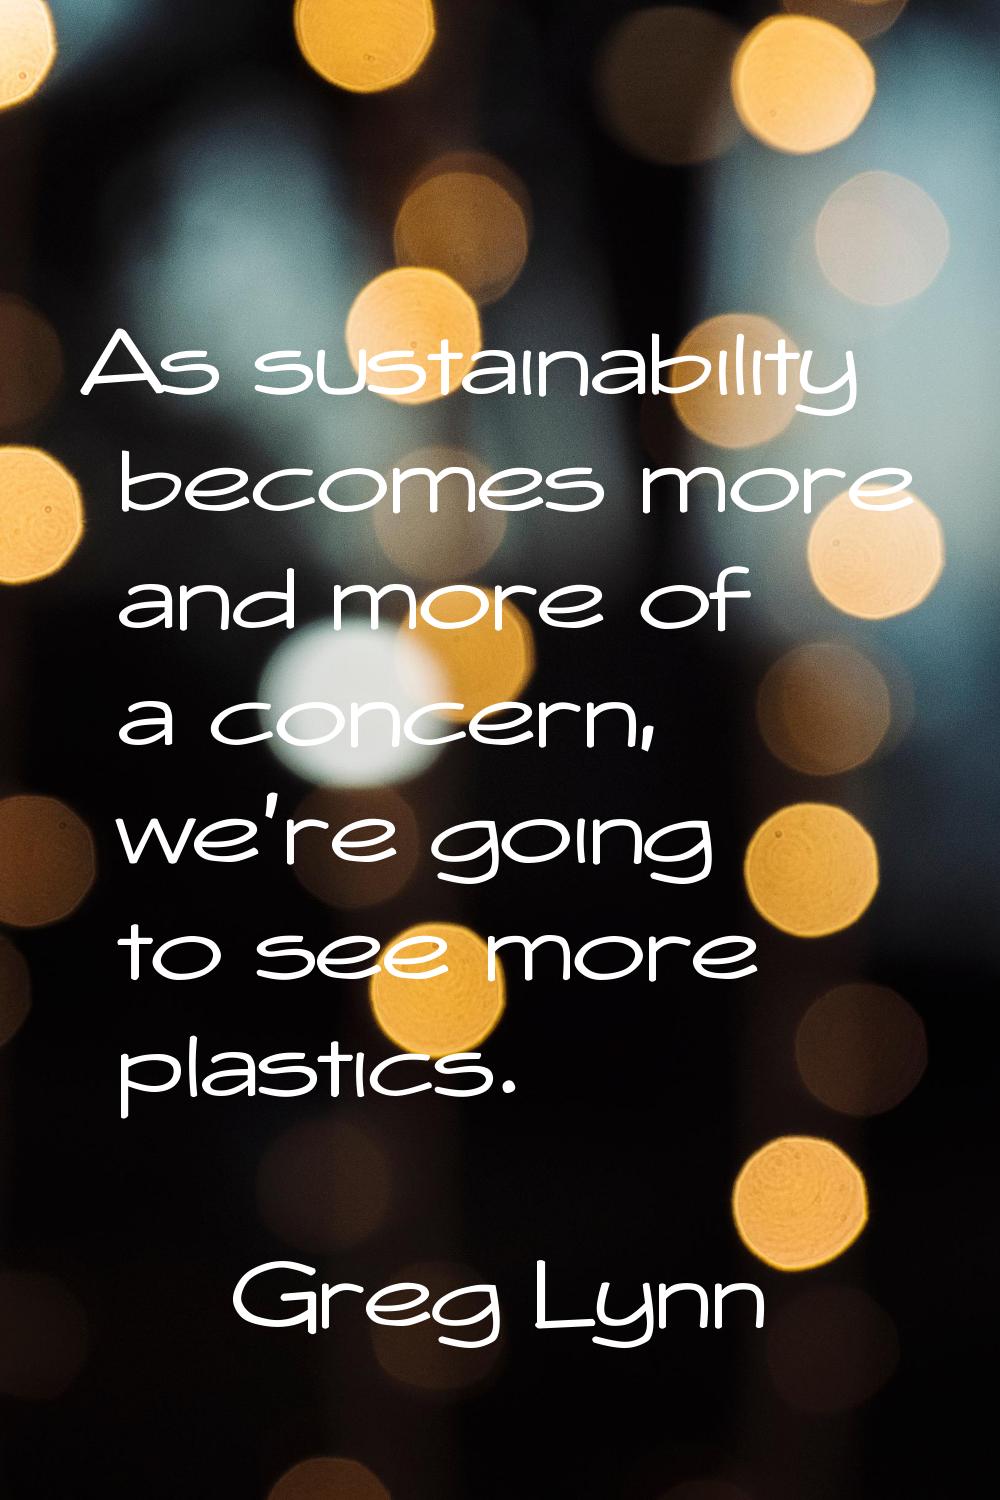 As sustainability becomes more and more of a concern, we're going to see more plastics.